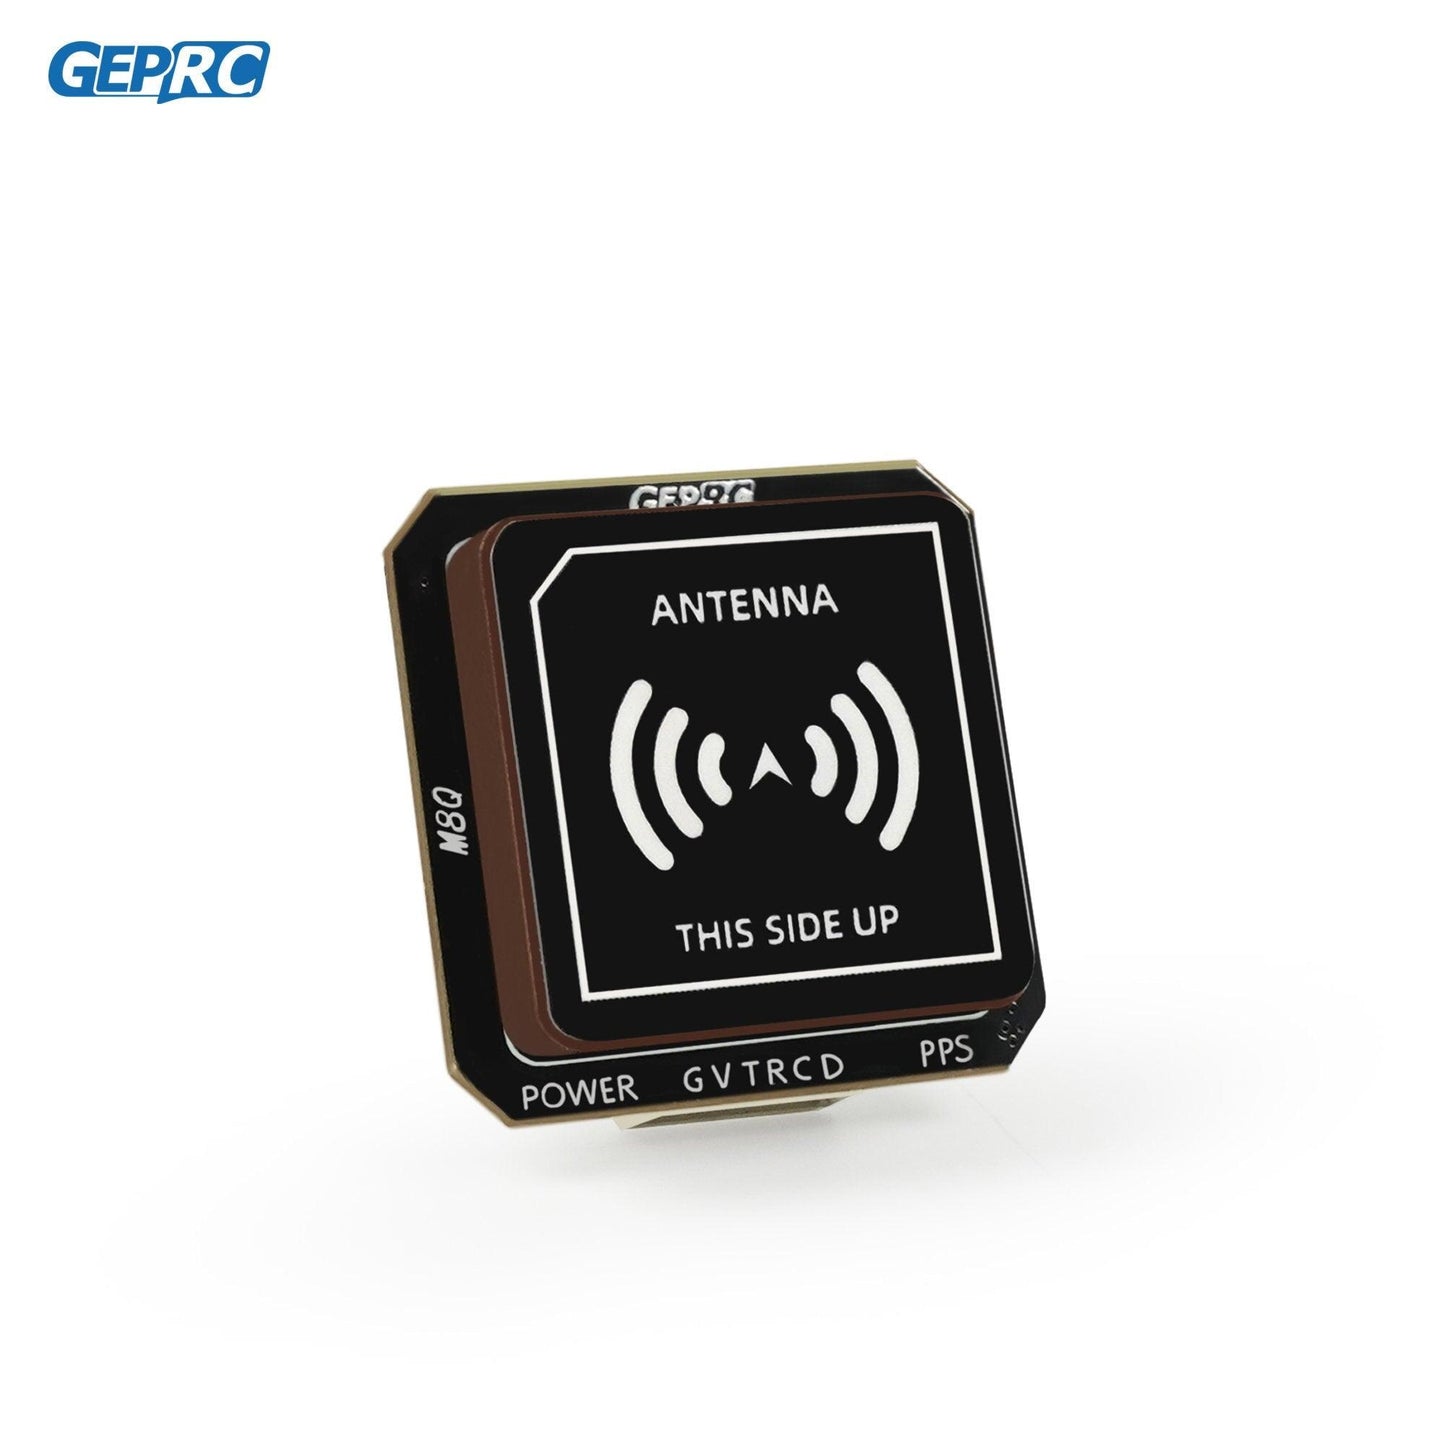 GEPRC GEP-M8Q GPS Module - Module Integrate BDS GLONASS Module SH1.0-6 Pin MS5611 Barometer Compass Farad Capacitor for FPV Drone - RCDrone